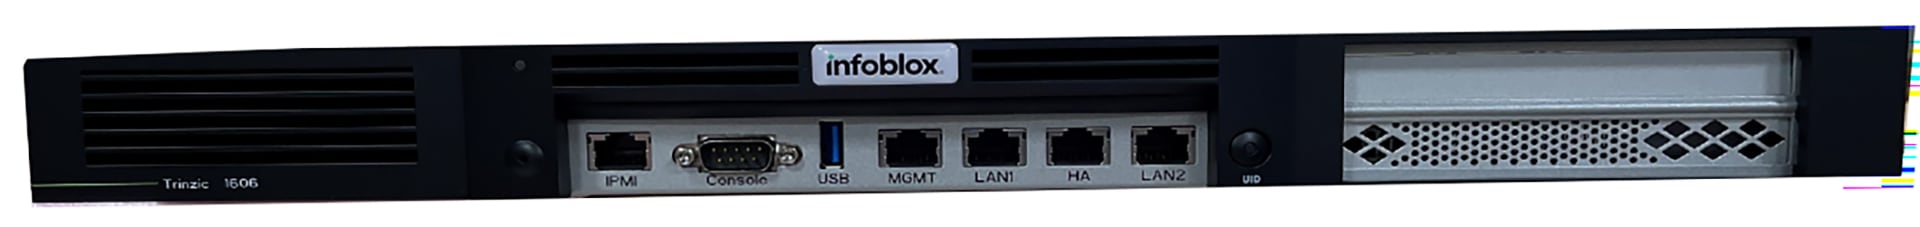 Infoblox TE-1606 Series Hardware Component Appliance